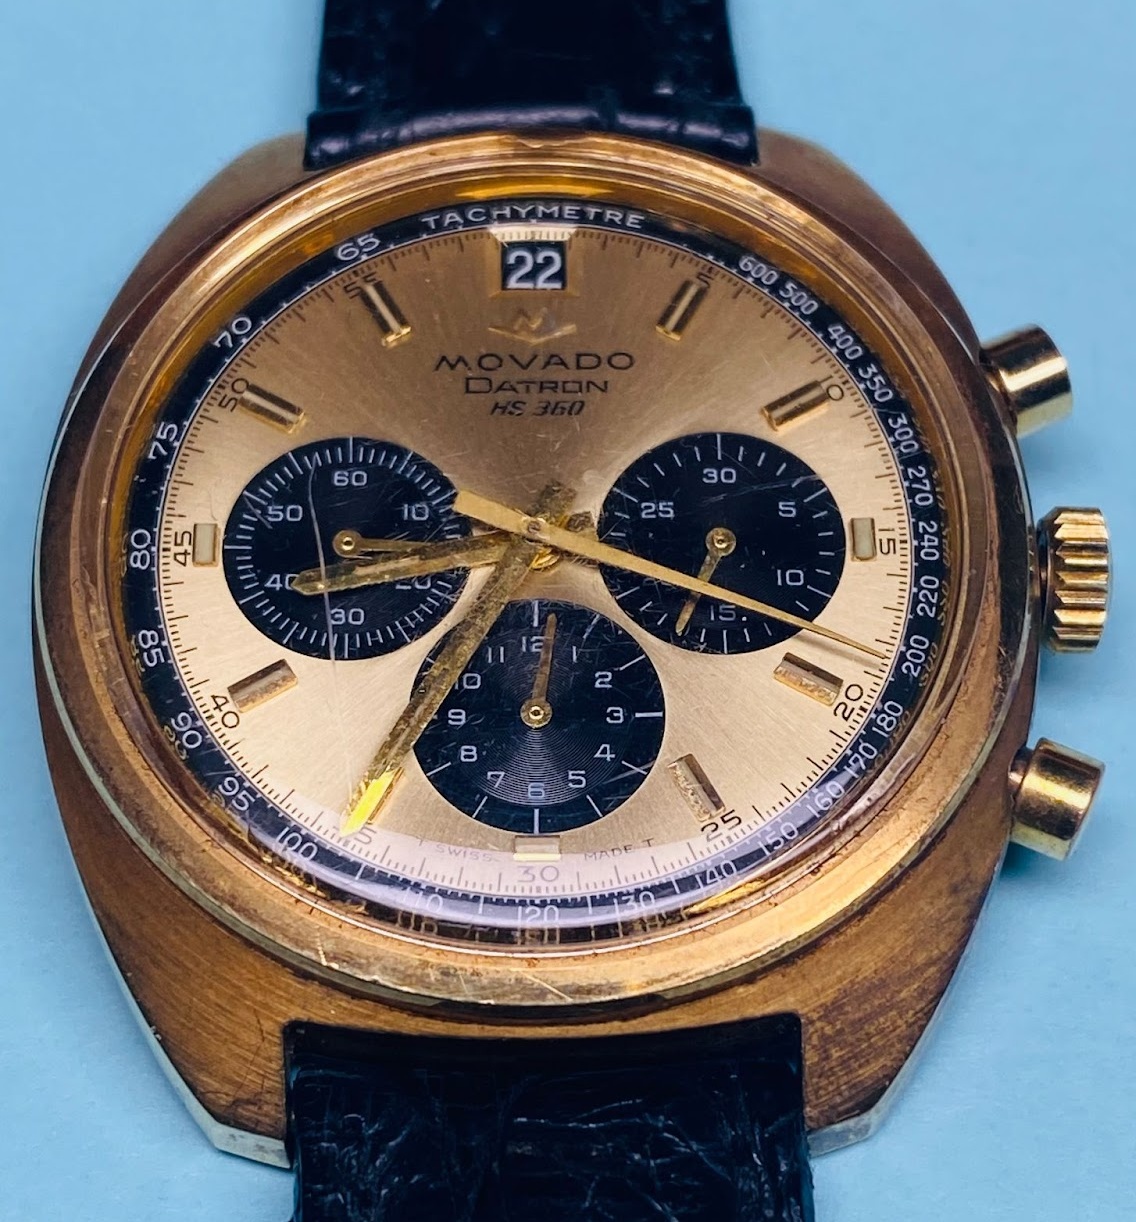 Watch Repair - Vintage Movado Datron HS360 with Zenith Movement